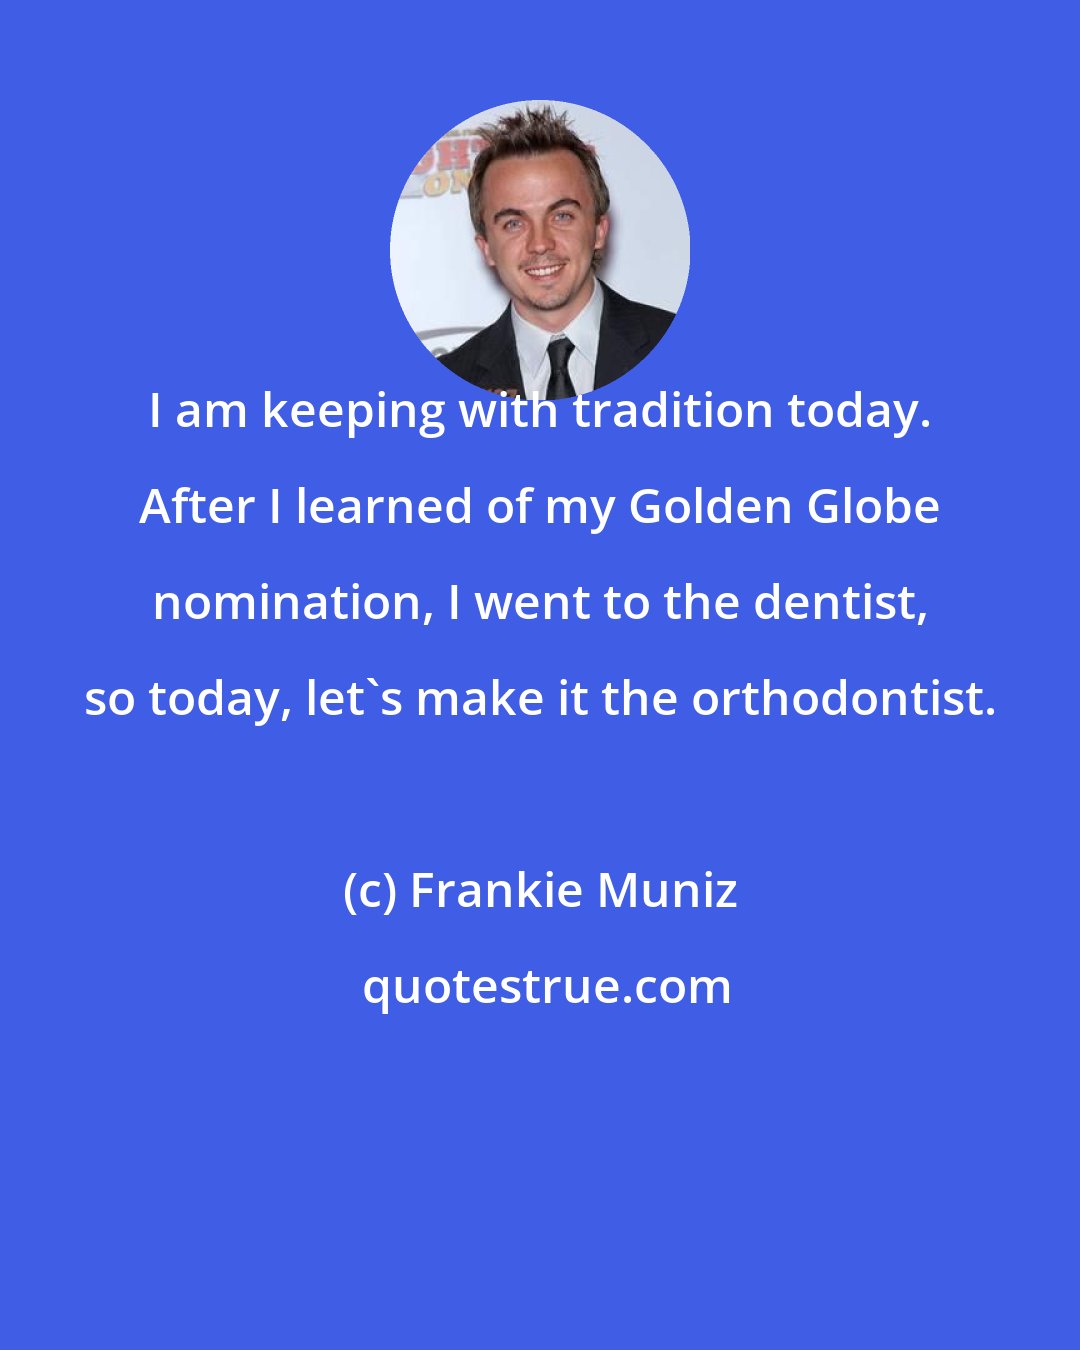 Frankie Muniz: I am keeping with tradition today. After I learned of my Golden Globe nomination, I went to the dentist, so today, let's make it the orthodontist.